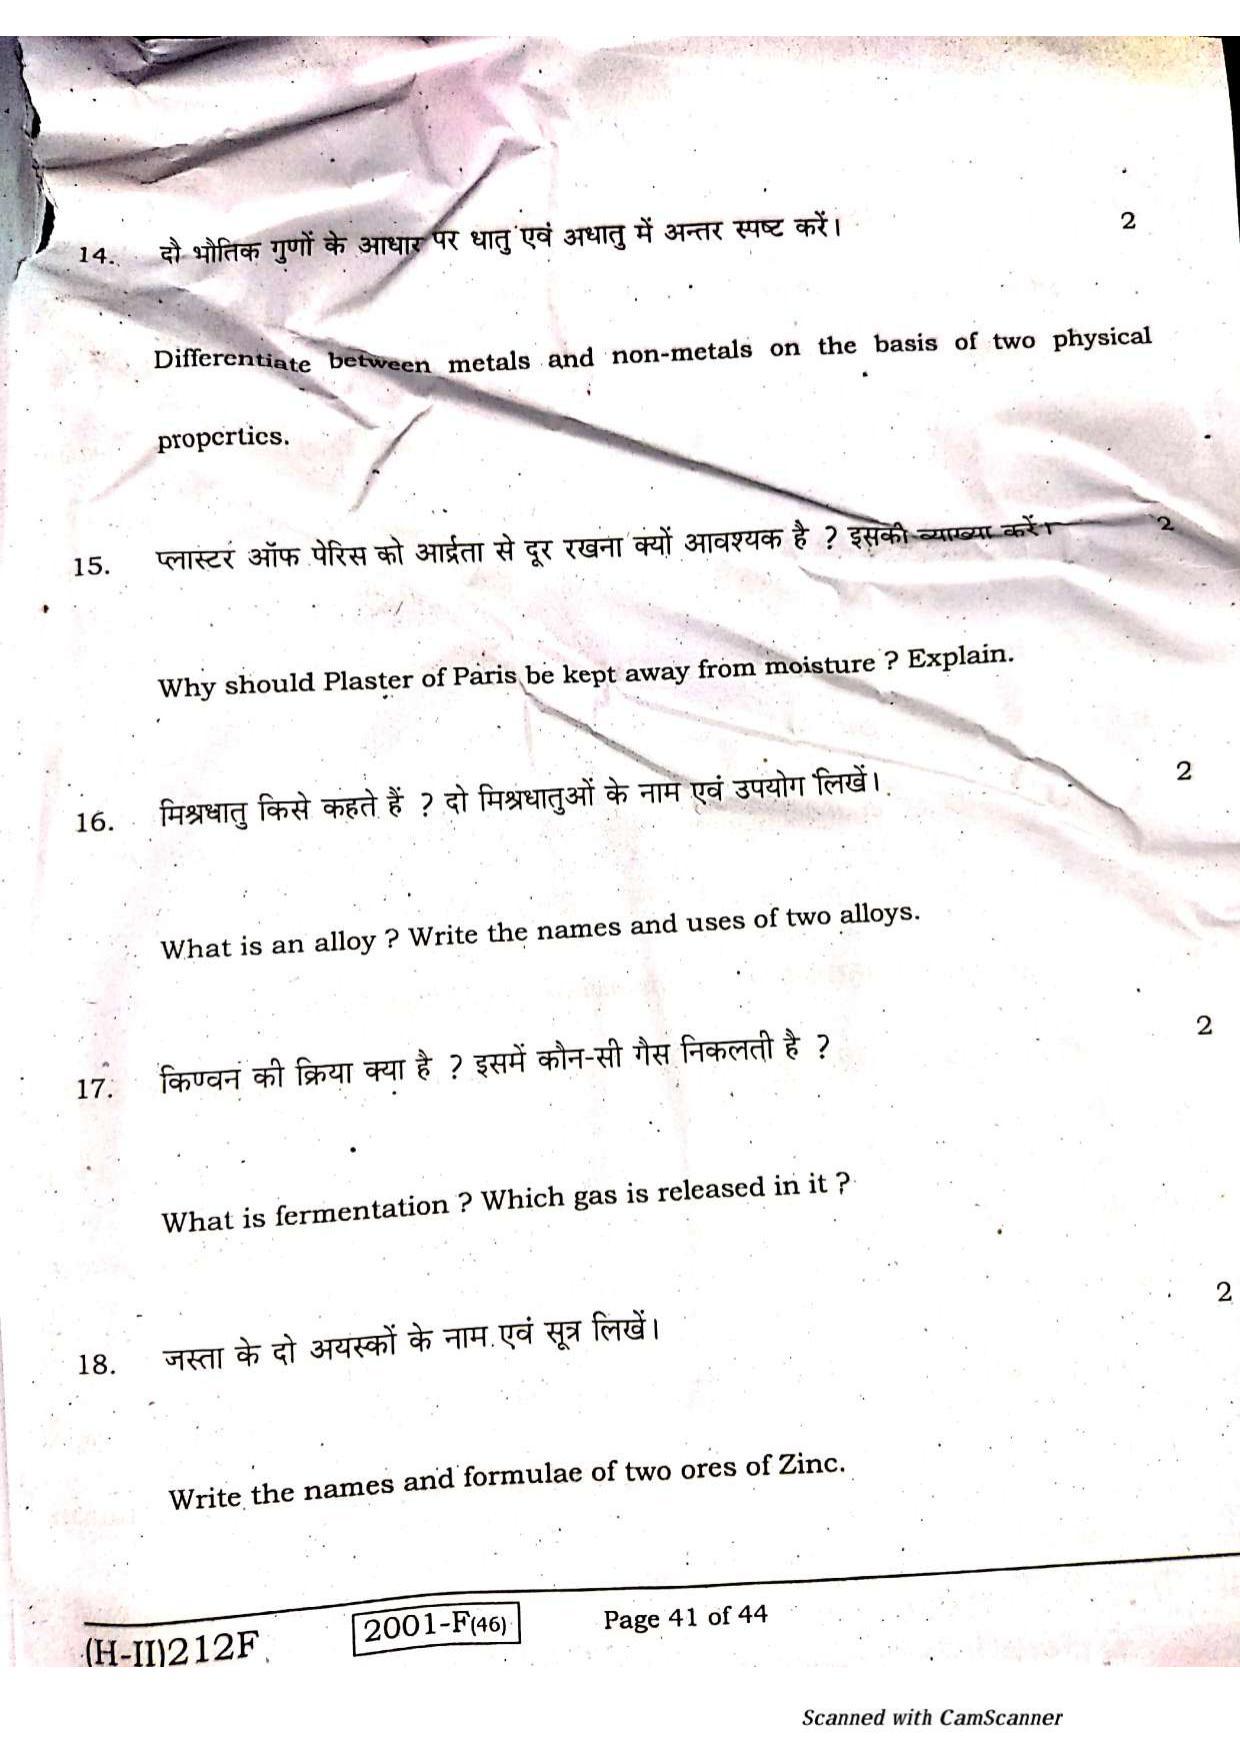 Bihar Board Class 10 Science 2021 (2nd Sitting) Question Paper - Page 39